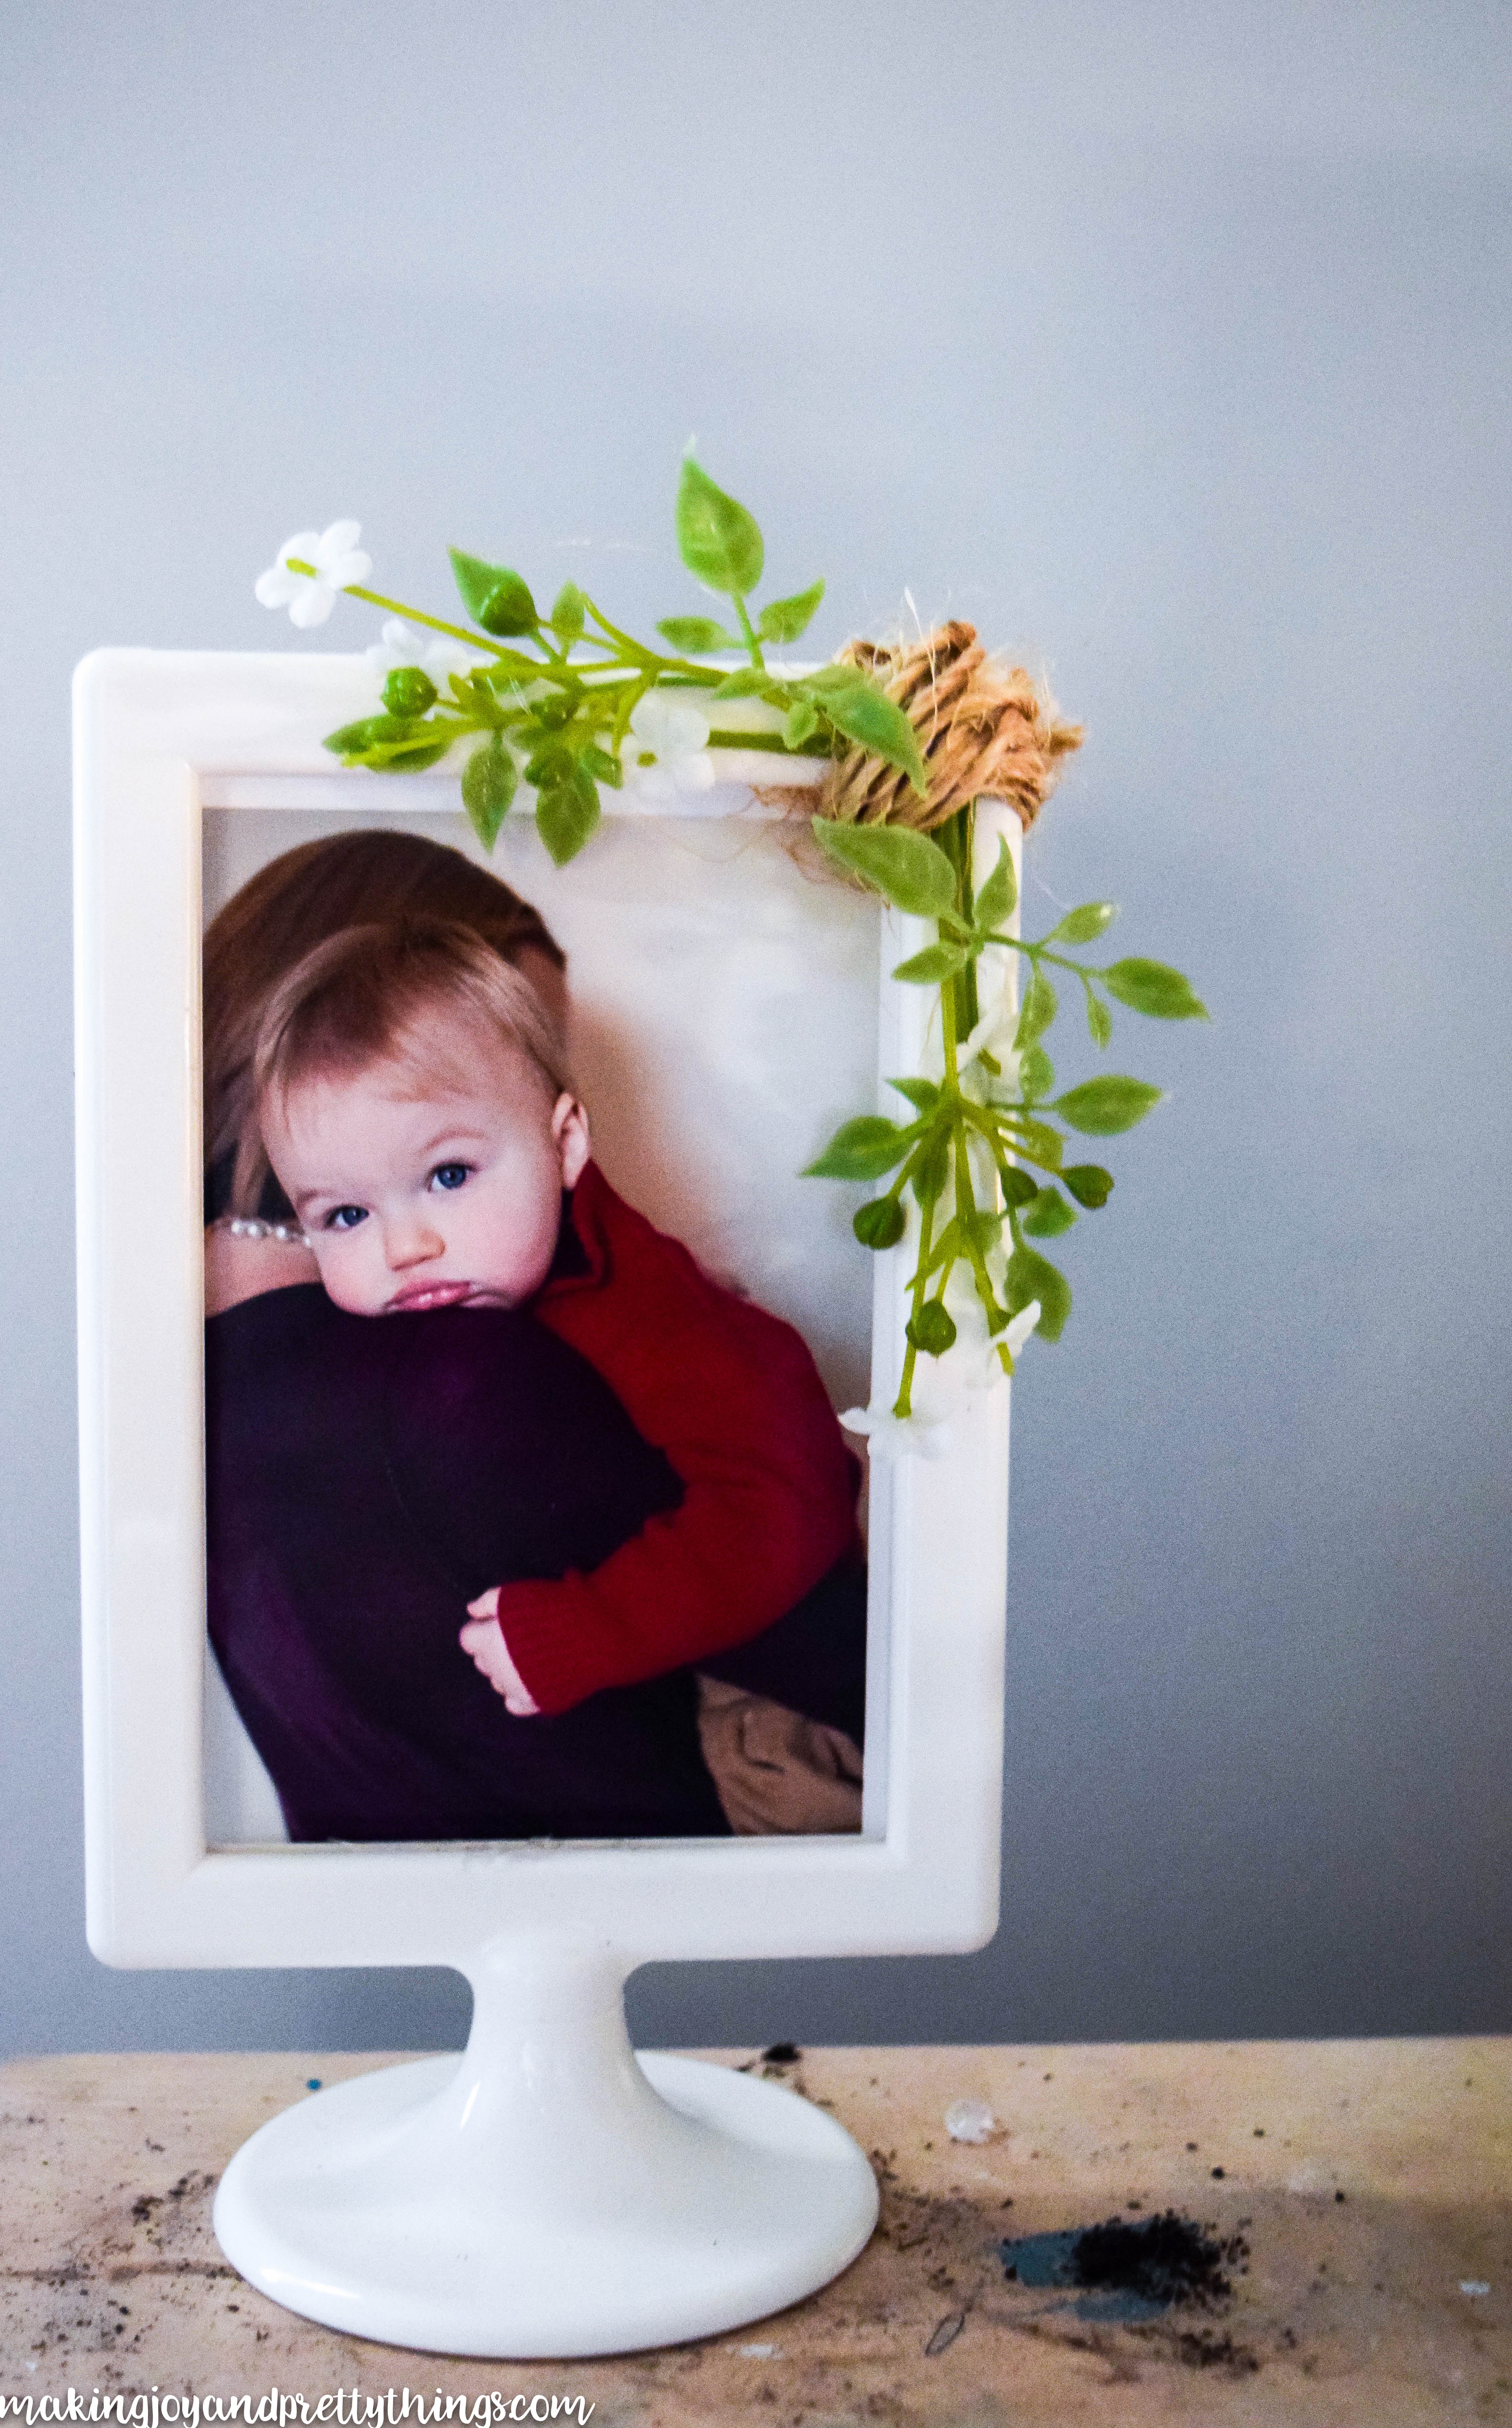 A simple white picture frame with a round base holds an image of a toddler looking over a mother's shoulder into the camera. Faux sprigs of greenery and small white flours are attached to the corner of the frame with crafting twine.